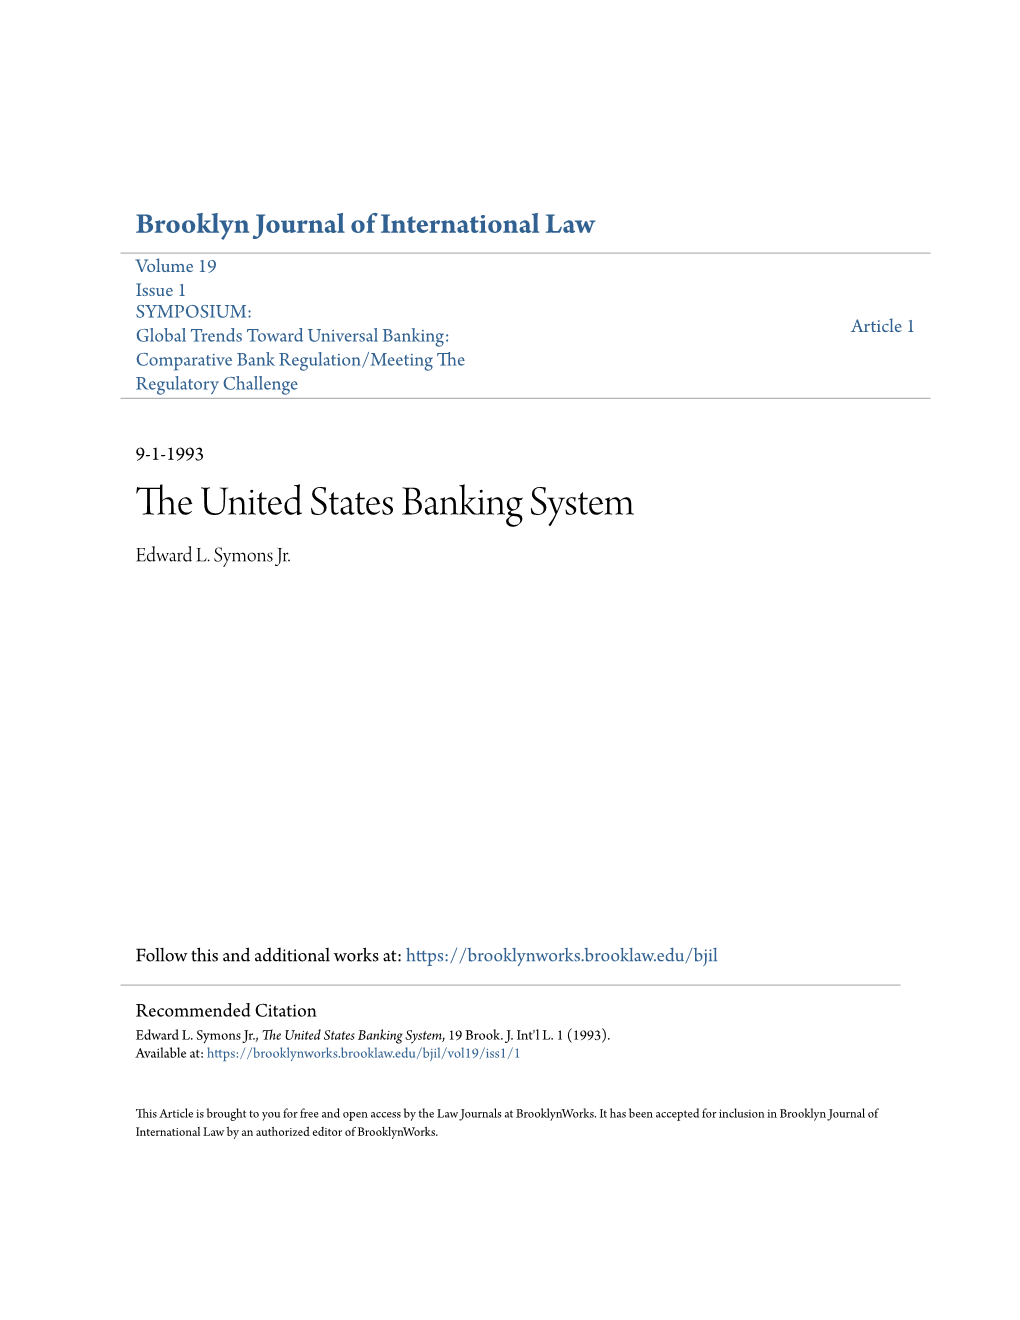 The United States Banking System, 19 Brook